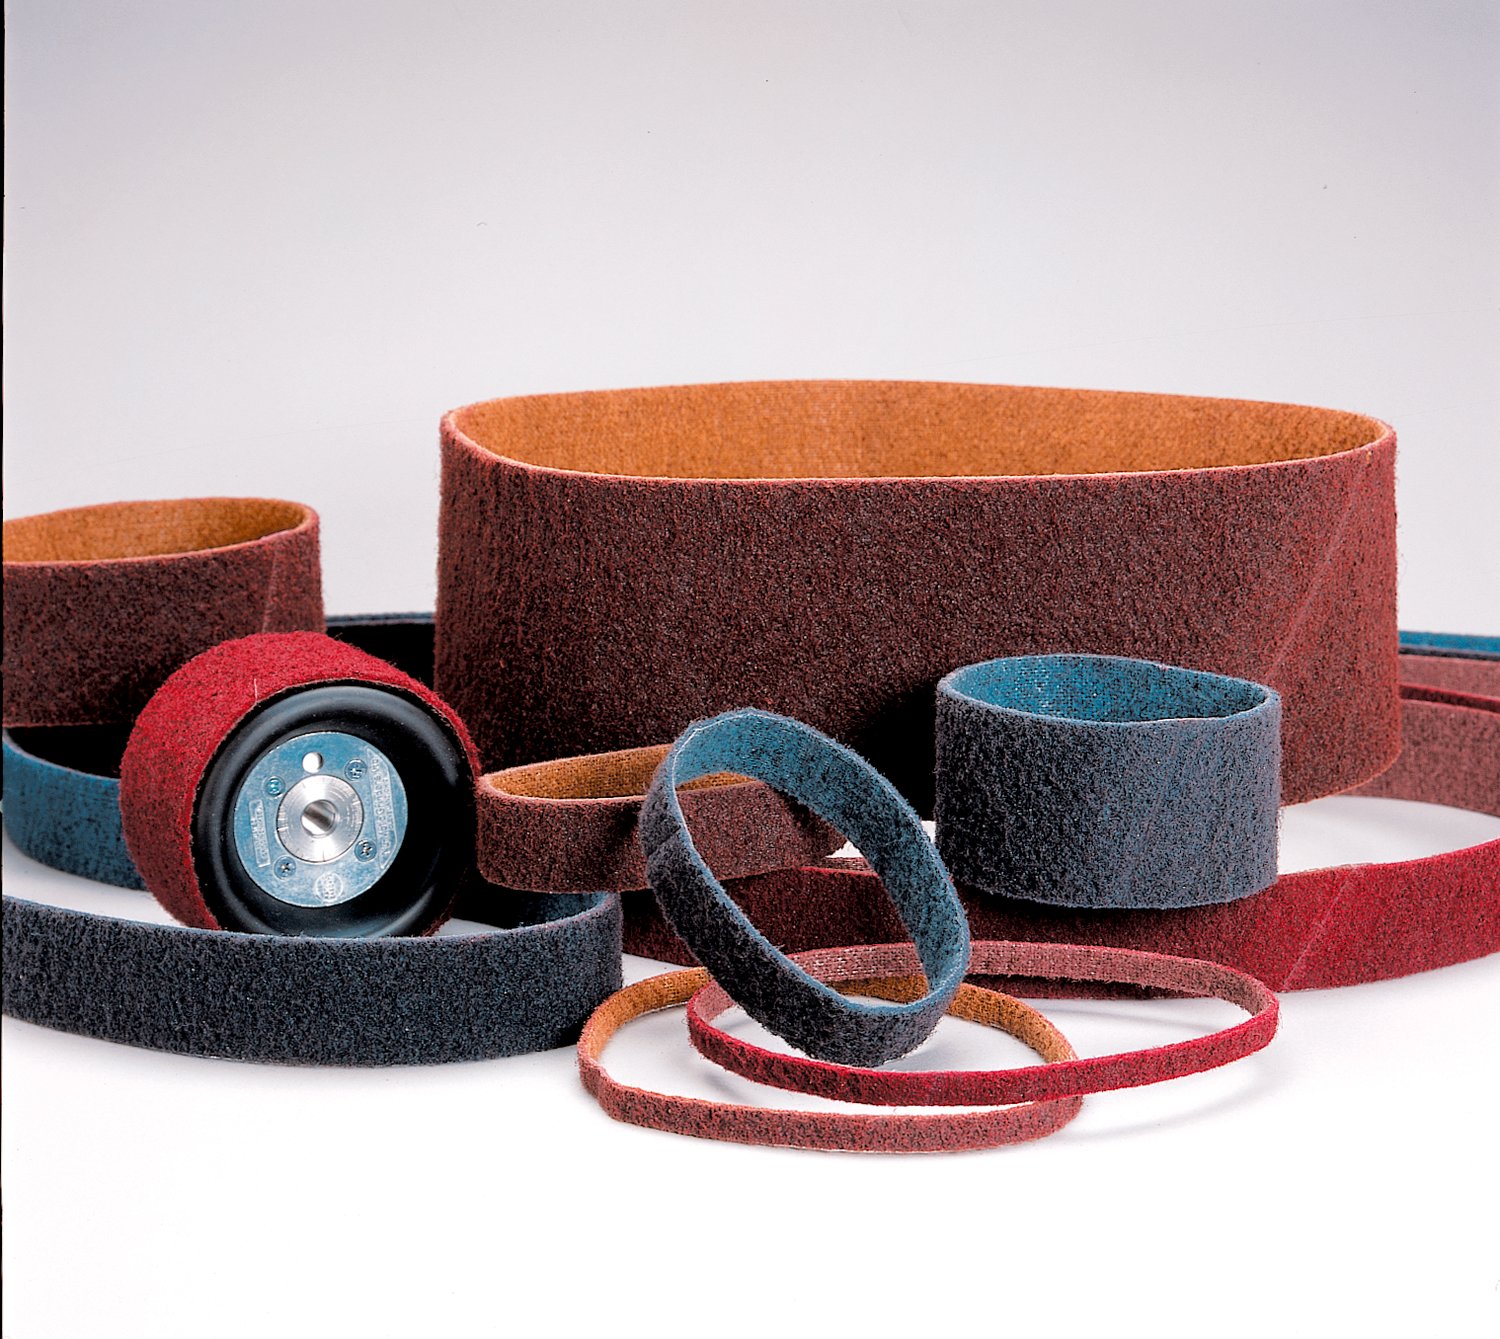 7010330849 - Standard Abrasives Surface Conditioning RC Belt 888037, 2 in x 132 in
MED, 5 ea/Case